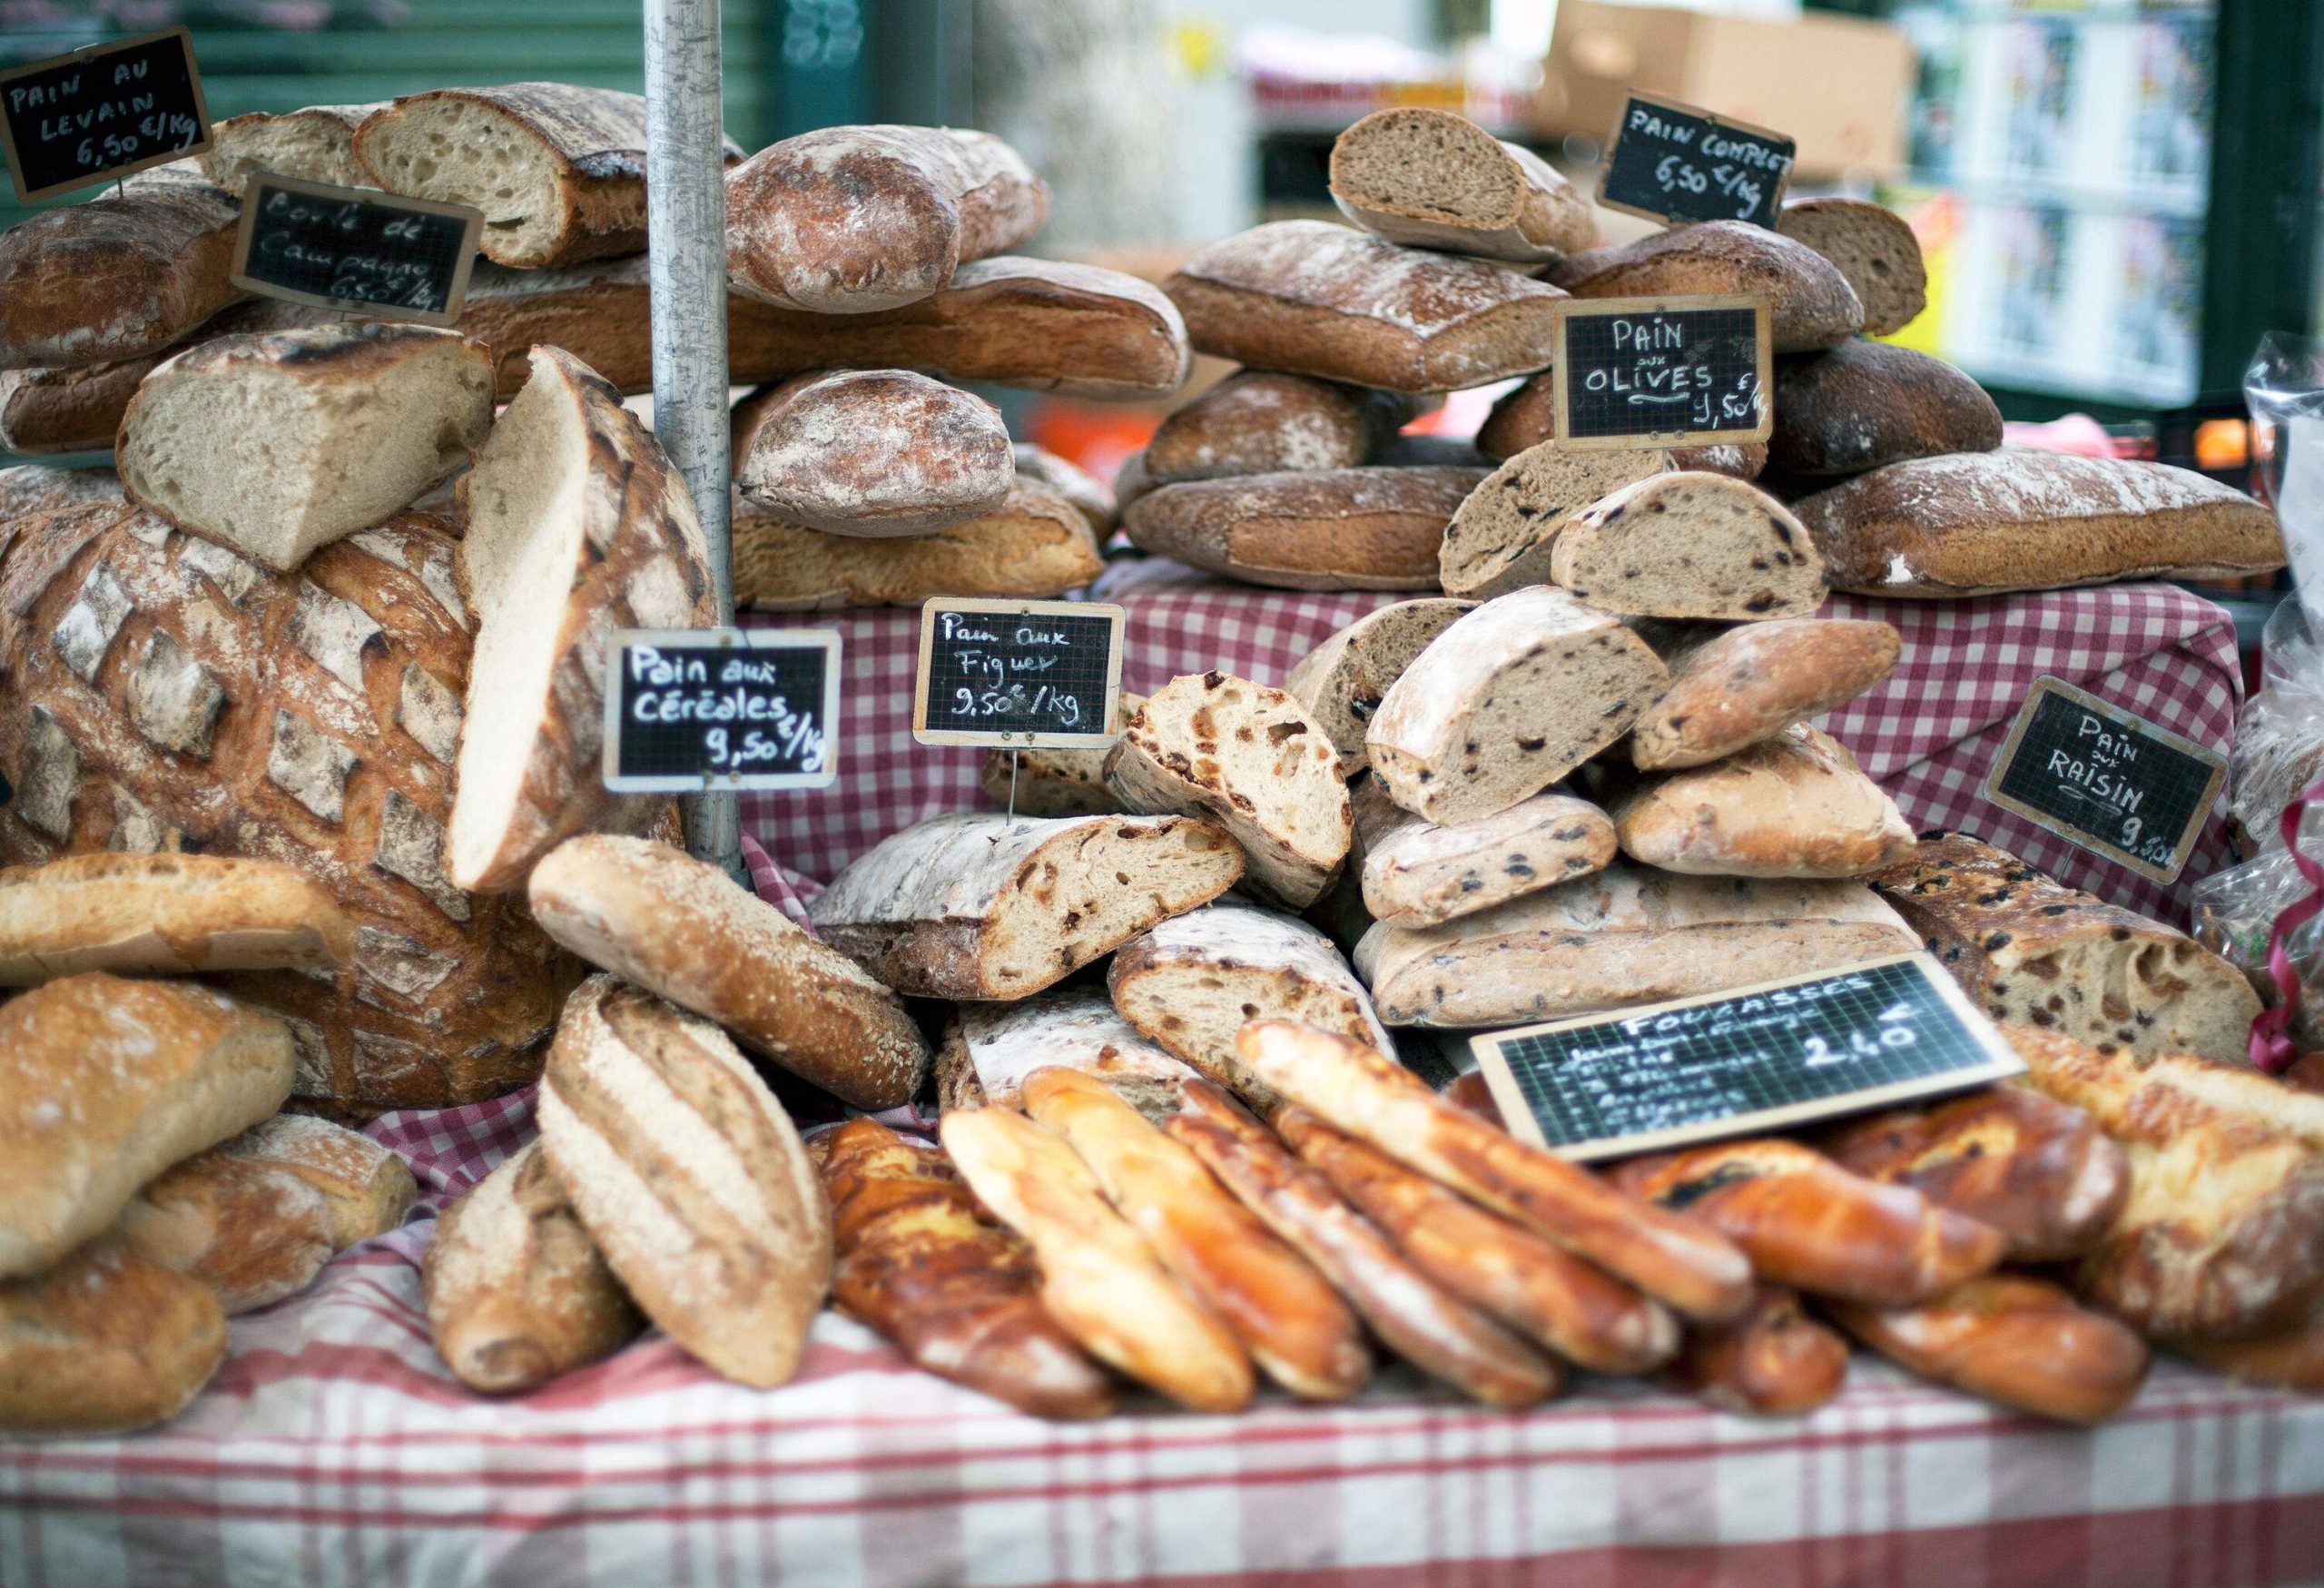 Different kinds of slices of bread are displayed on the market.